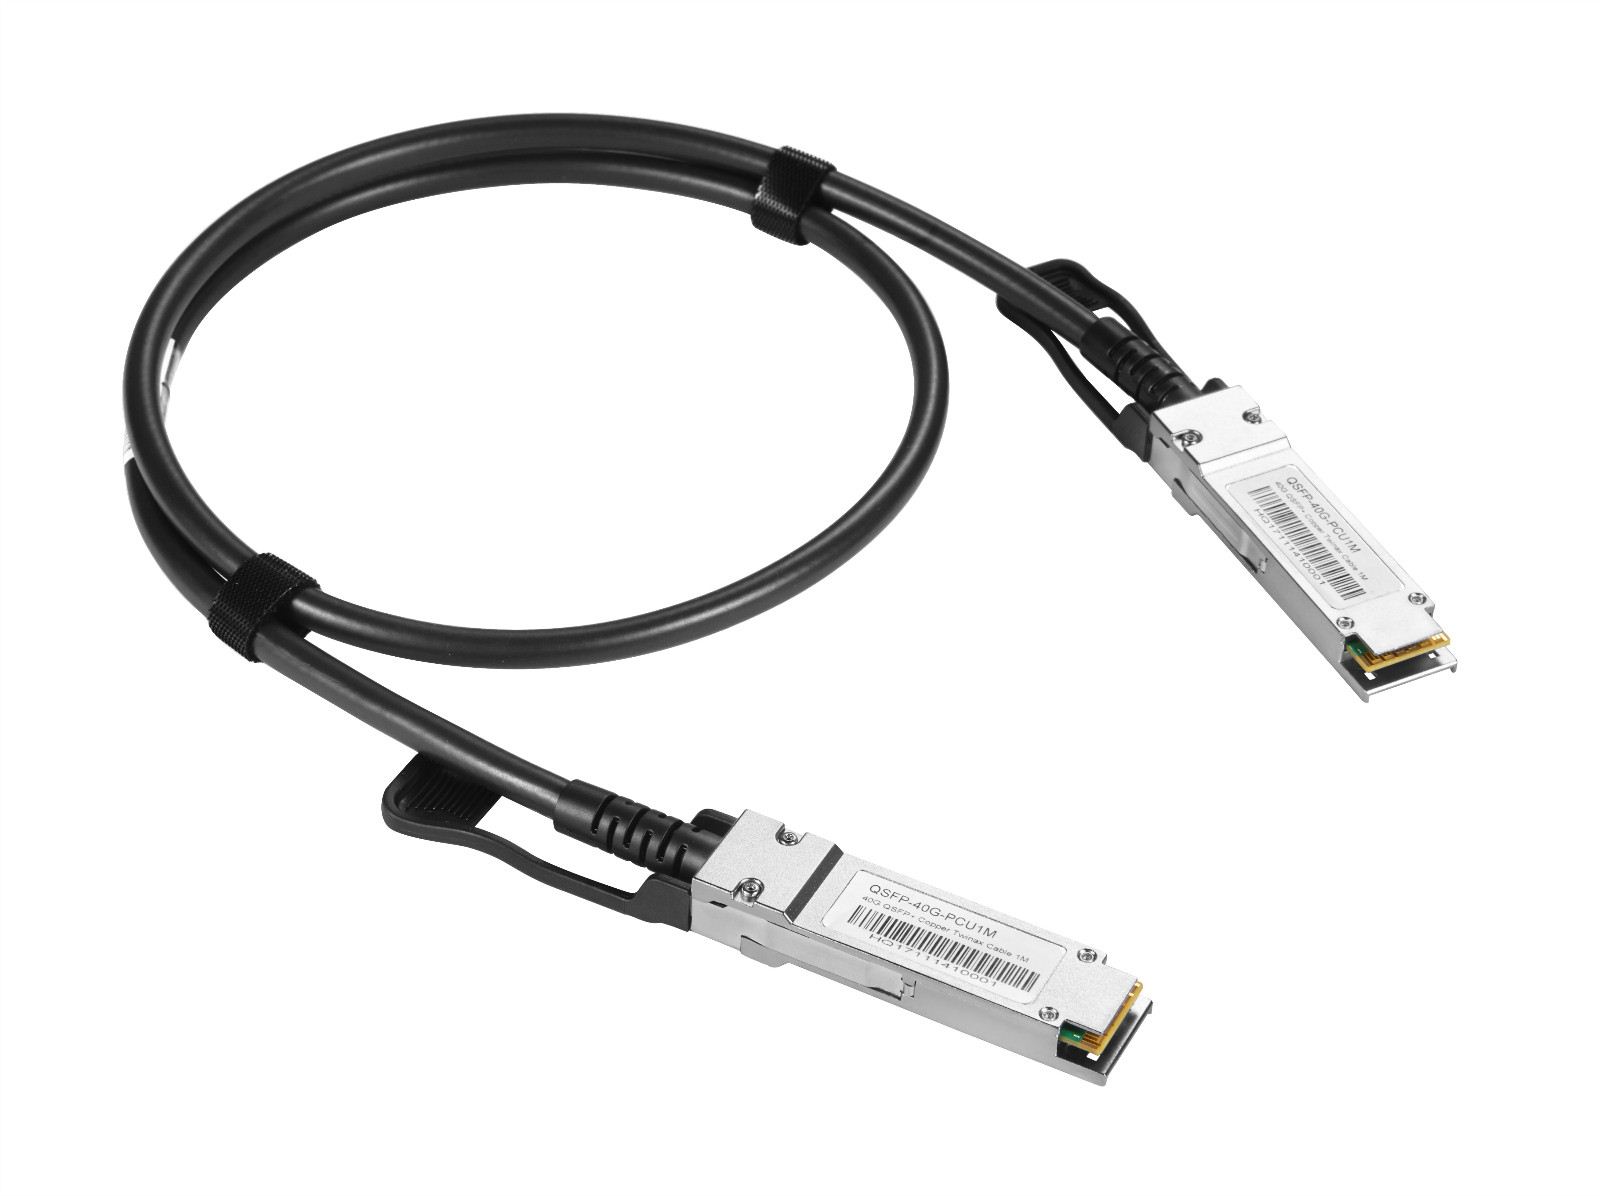 Cable, a leadingSFP DAC Cable brand which has a vast market